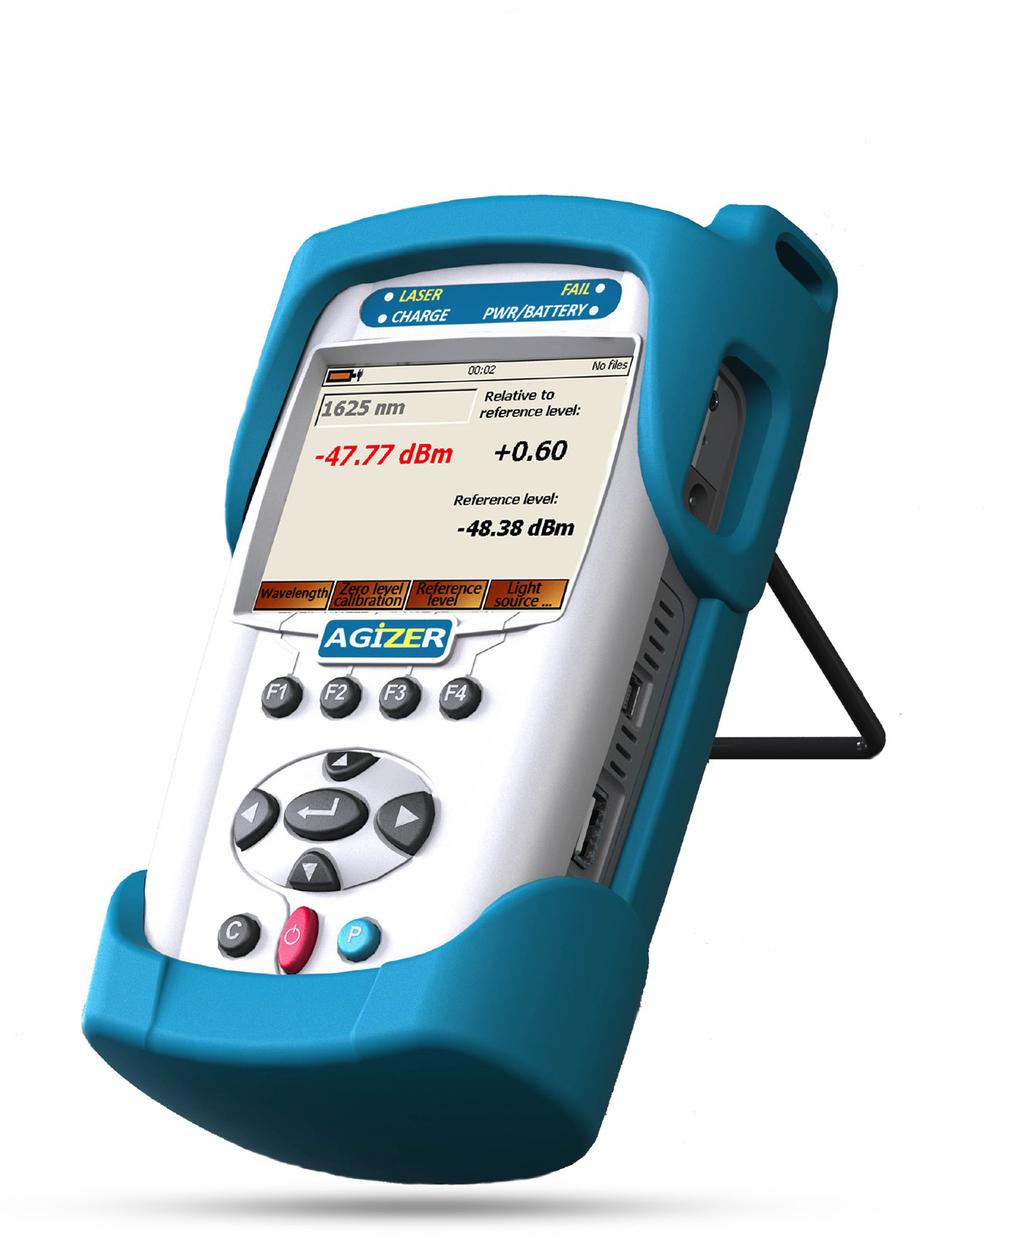 , InGaAs Photodiode Hight quality power meter, InGaAs Photodiode with large sensitive area (1000μm) installed right to the with large sensitive area (1000μm) installed right to the optical adaptor on